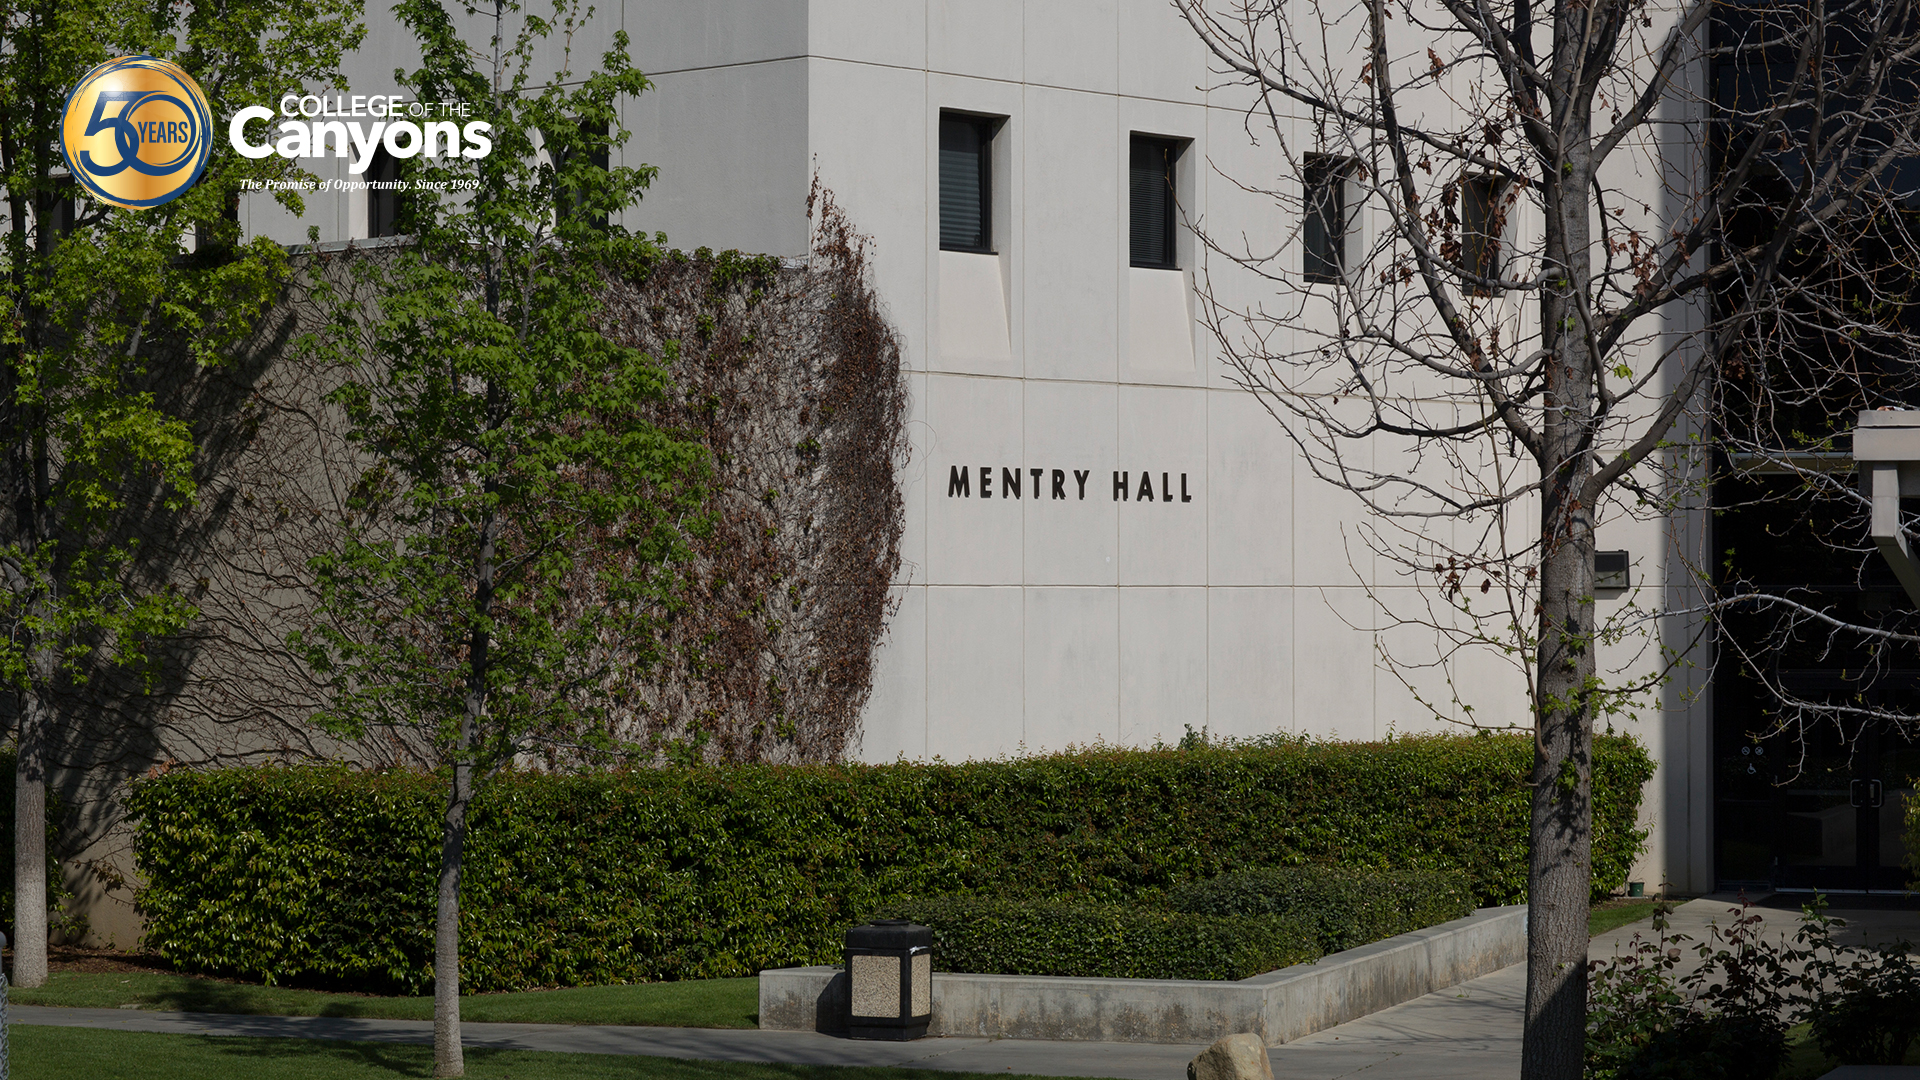 Mentry Hall